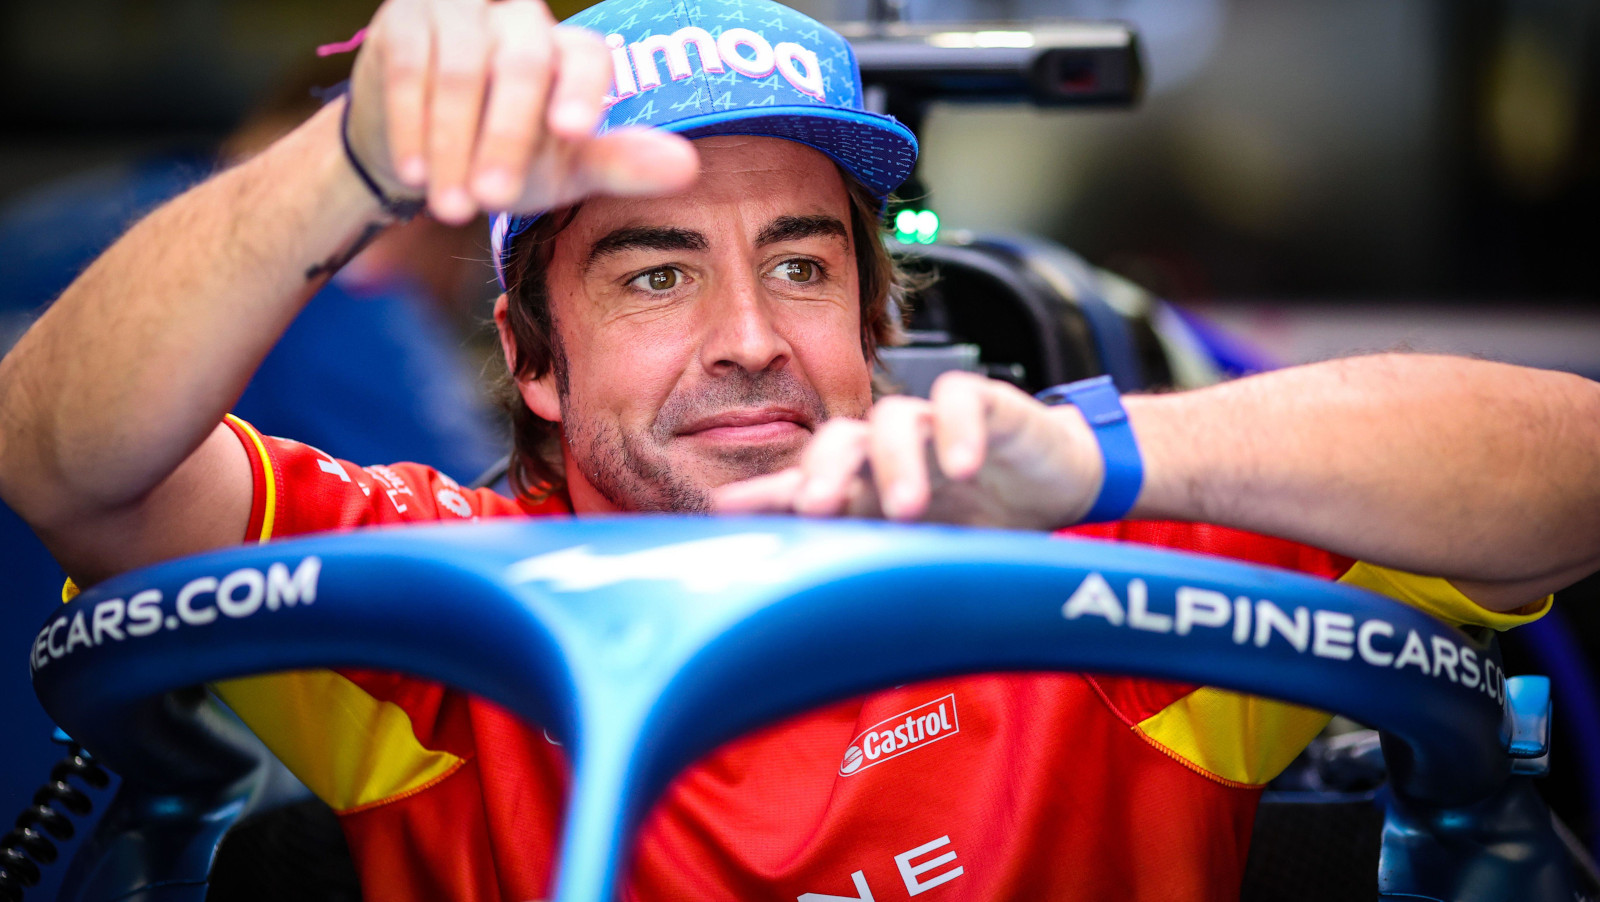 Fernando Alonso smiling as he checks out his Alpine ahead of the race weekend . Spain May 2022